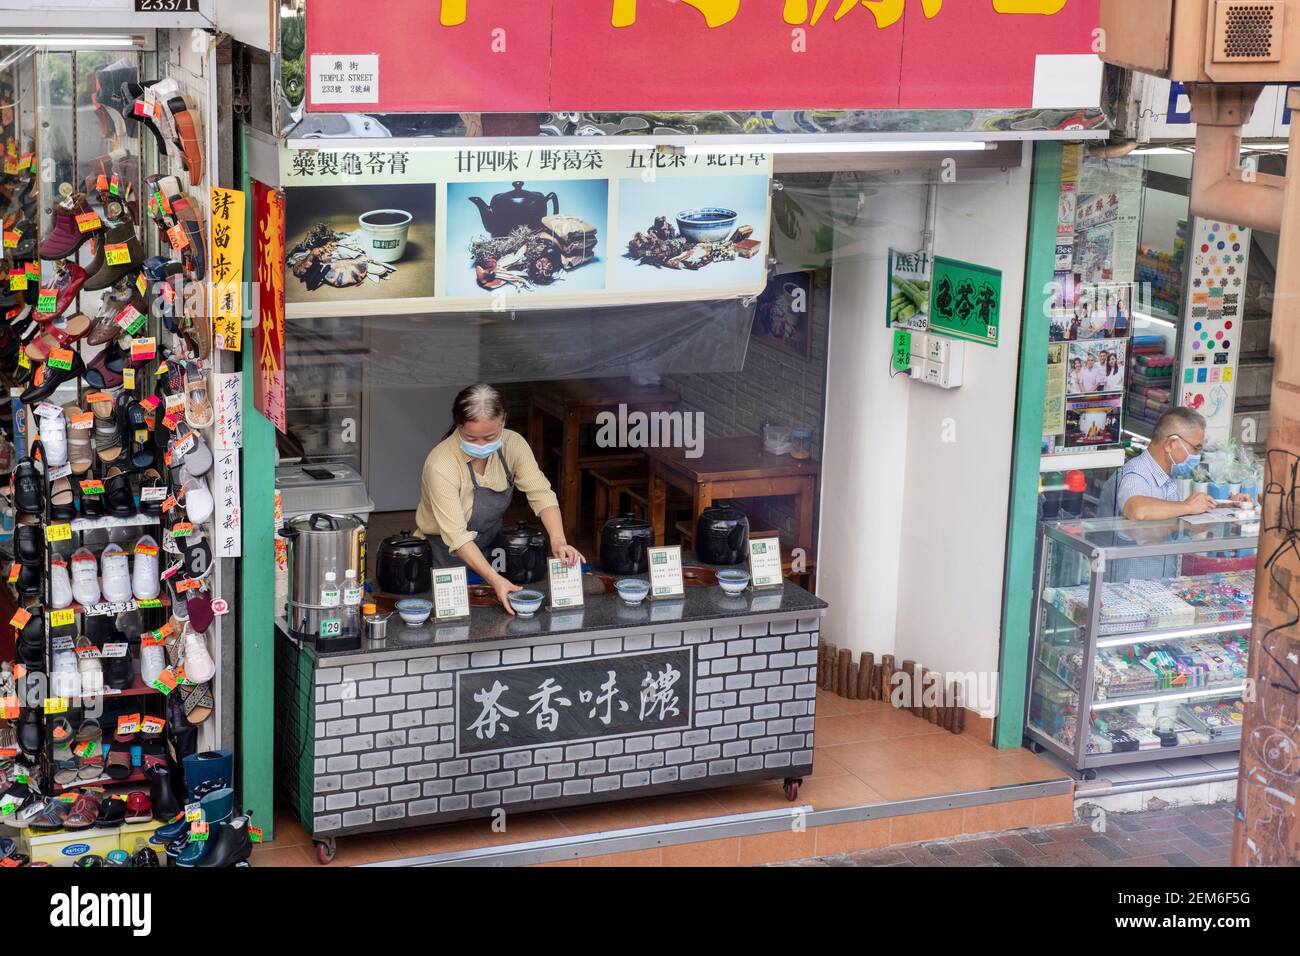 Hong Kong,China:11 Oct,2020.   A lady serves tea from a roadside tea and soup stand in Jordan Hong Kong Alamy Stock Image/Jayne Russell Stock Photo